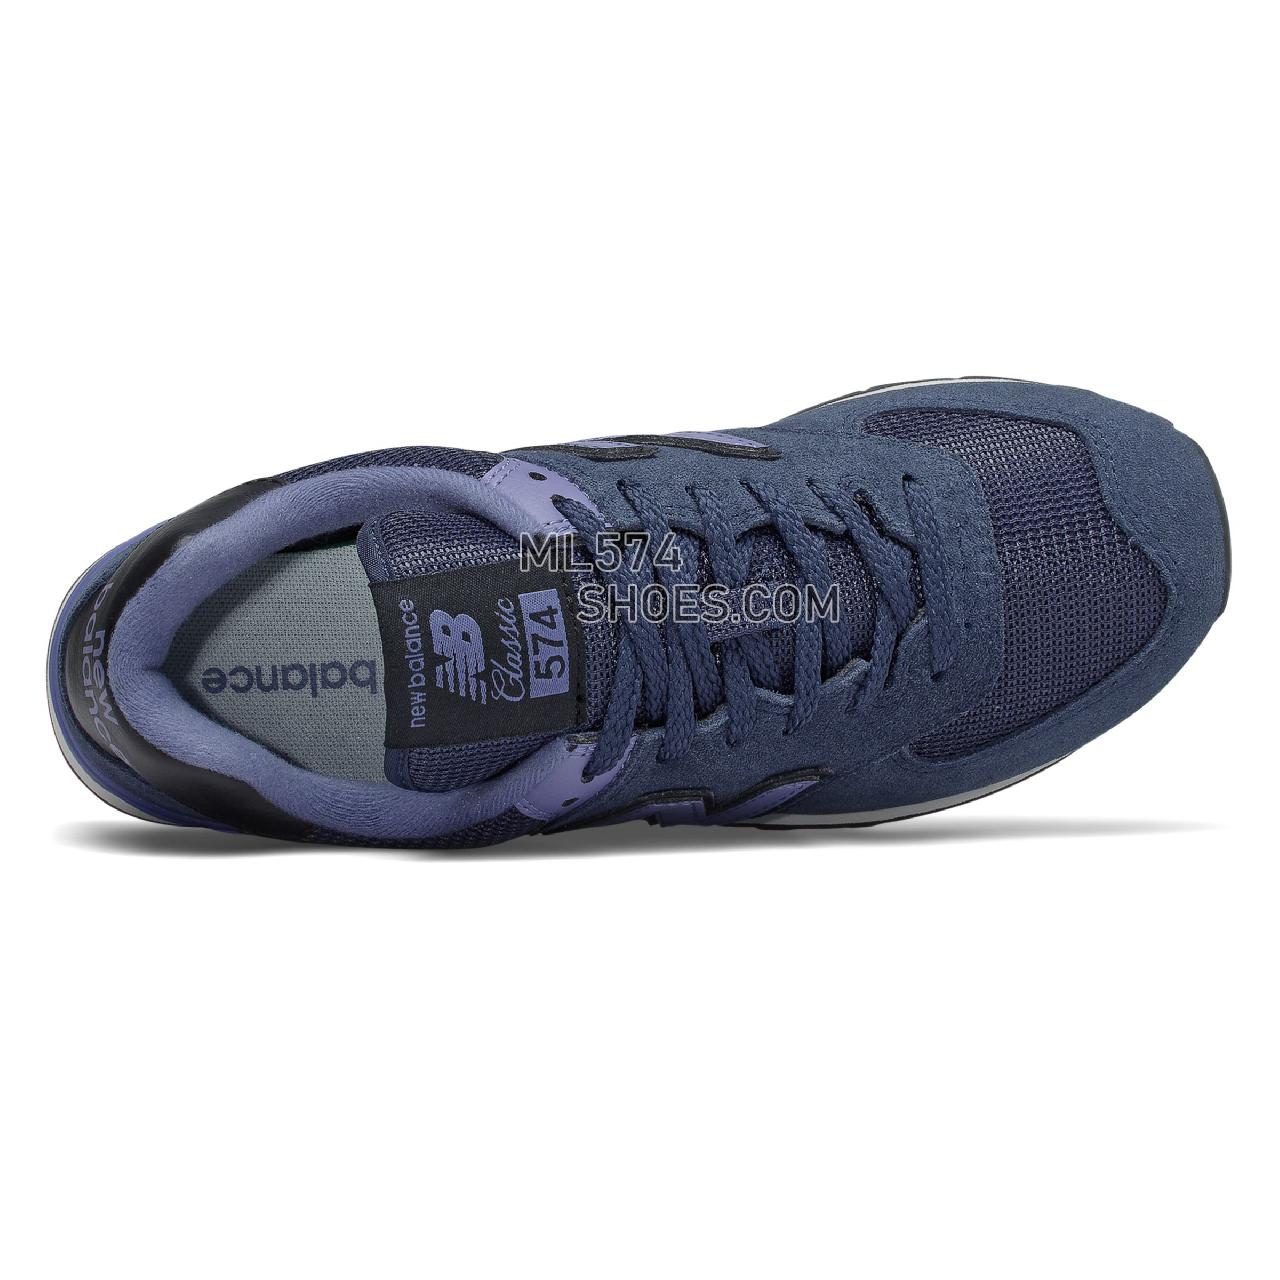 New Balance 574 - Women's Classic Sneakers - Natural Indigo with Black - WL574LBG